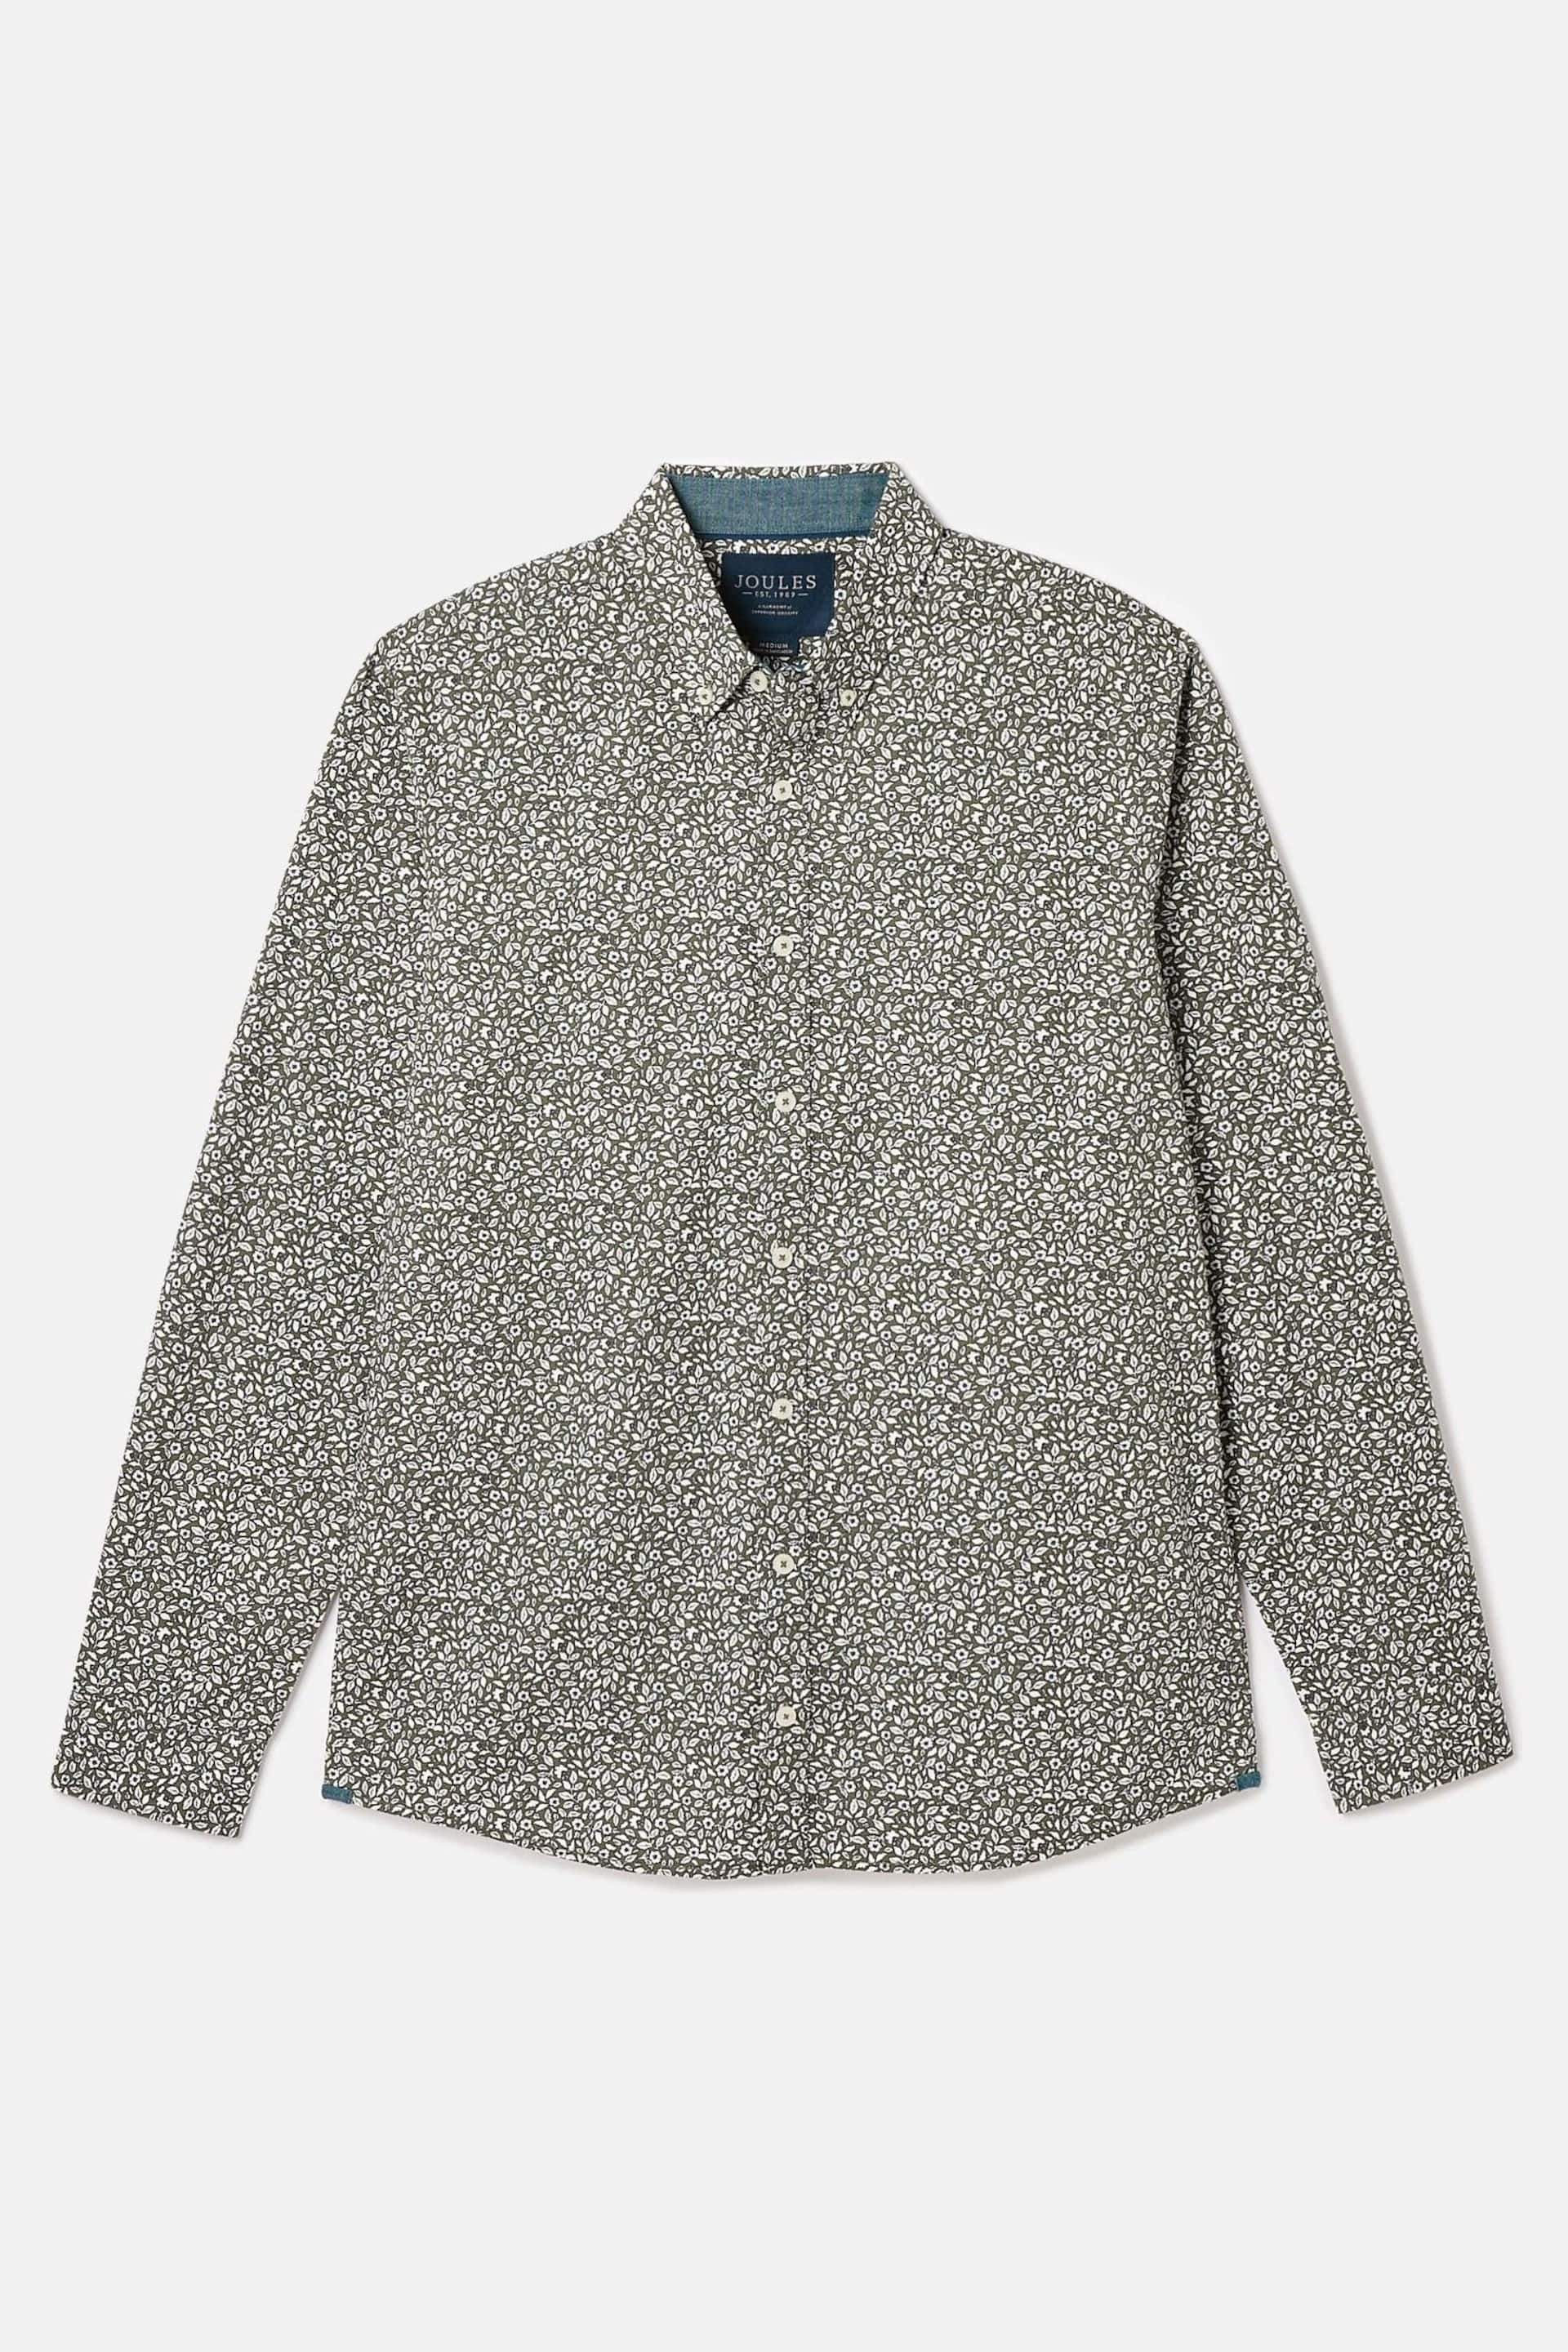 Joules Invitation Green Floral Cotton Shirt - Image 7 of 7